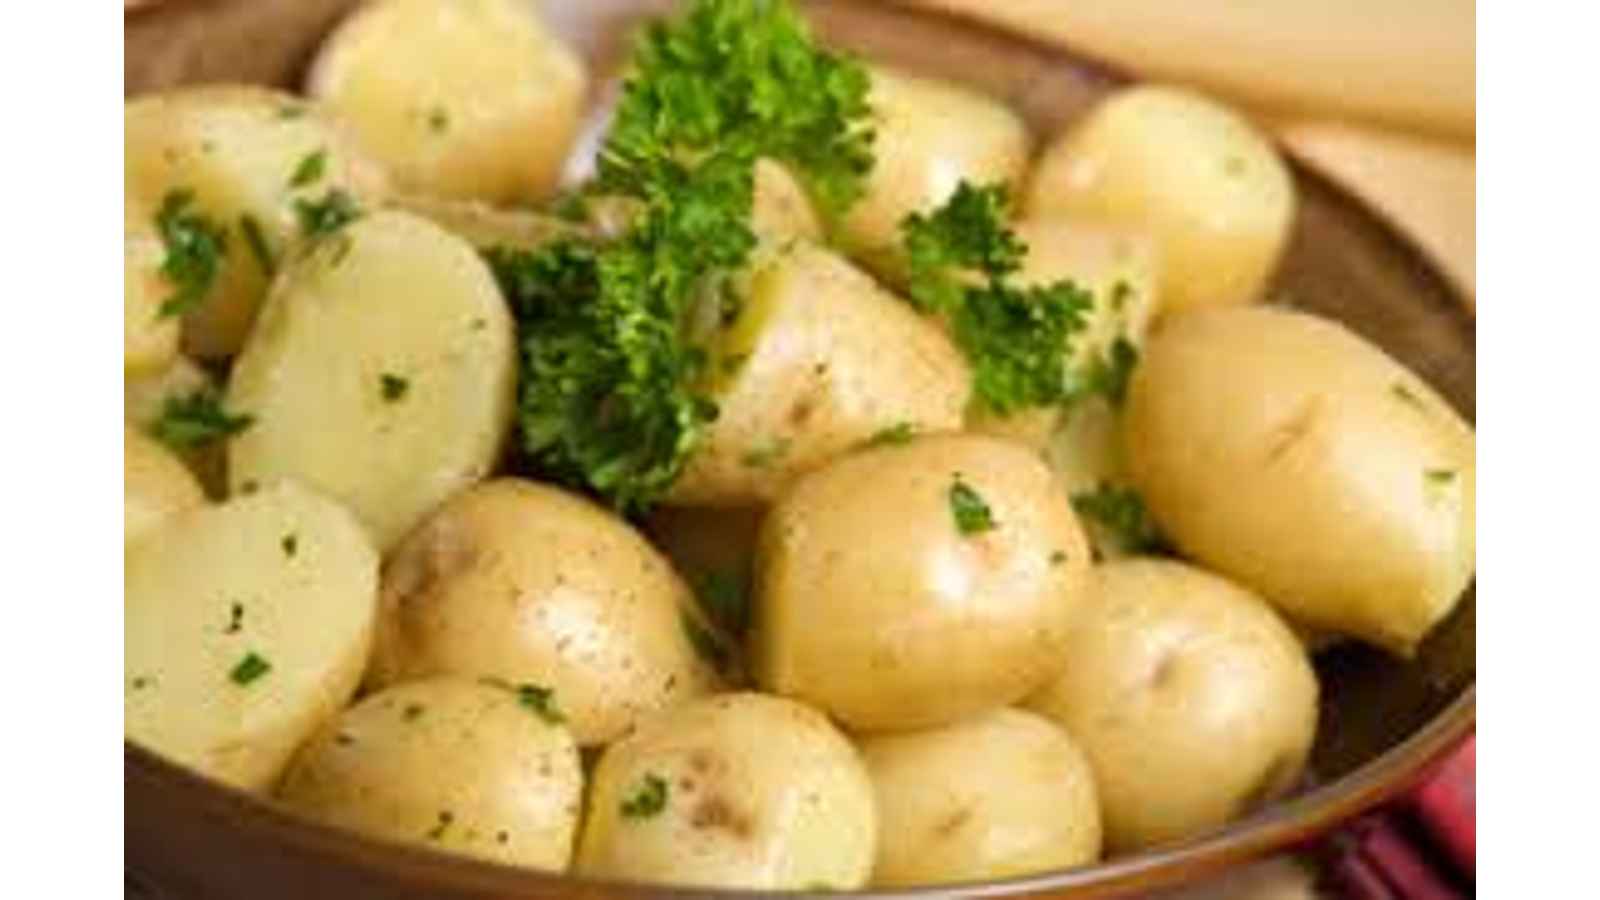 National Potato Day 2023: Date, History, Facts, Events